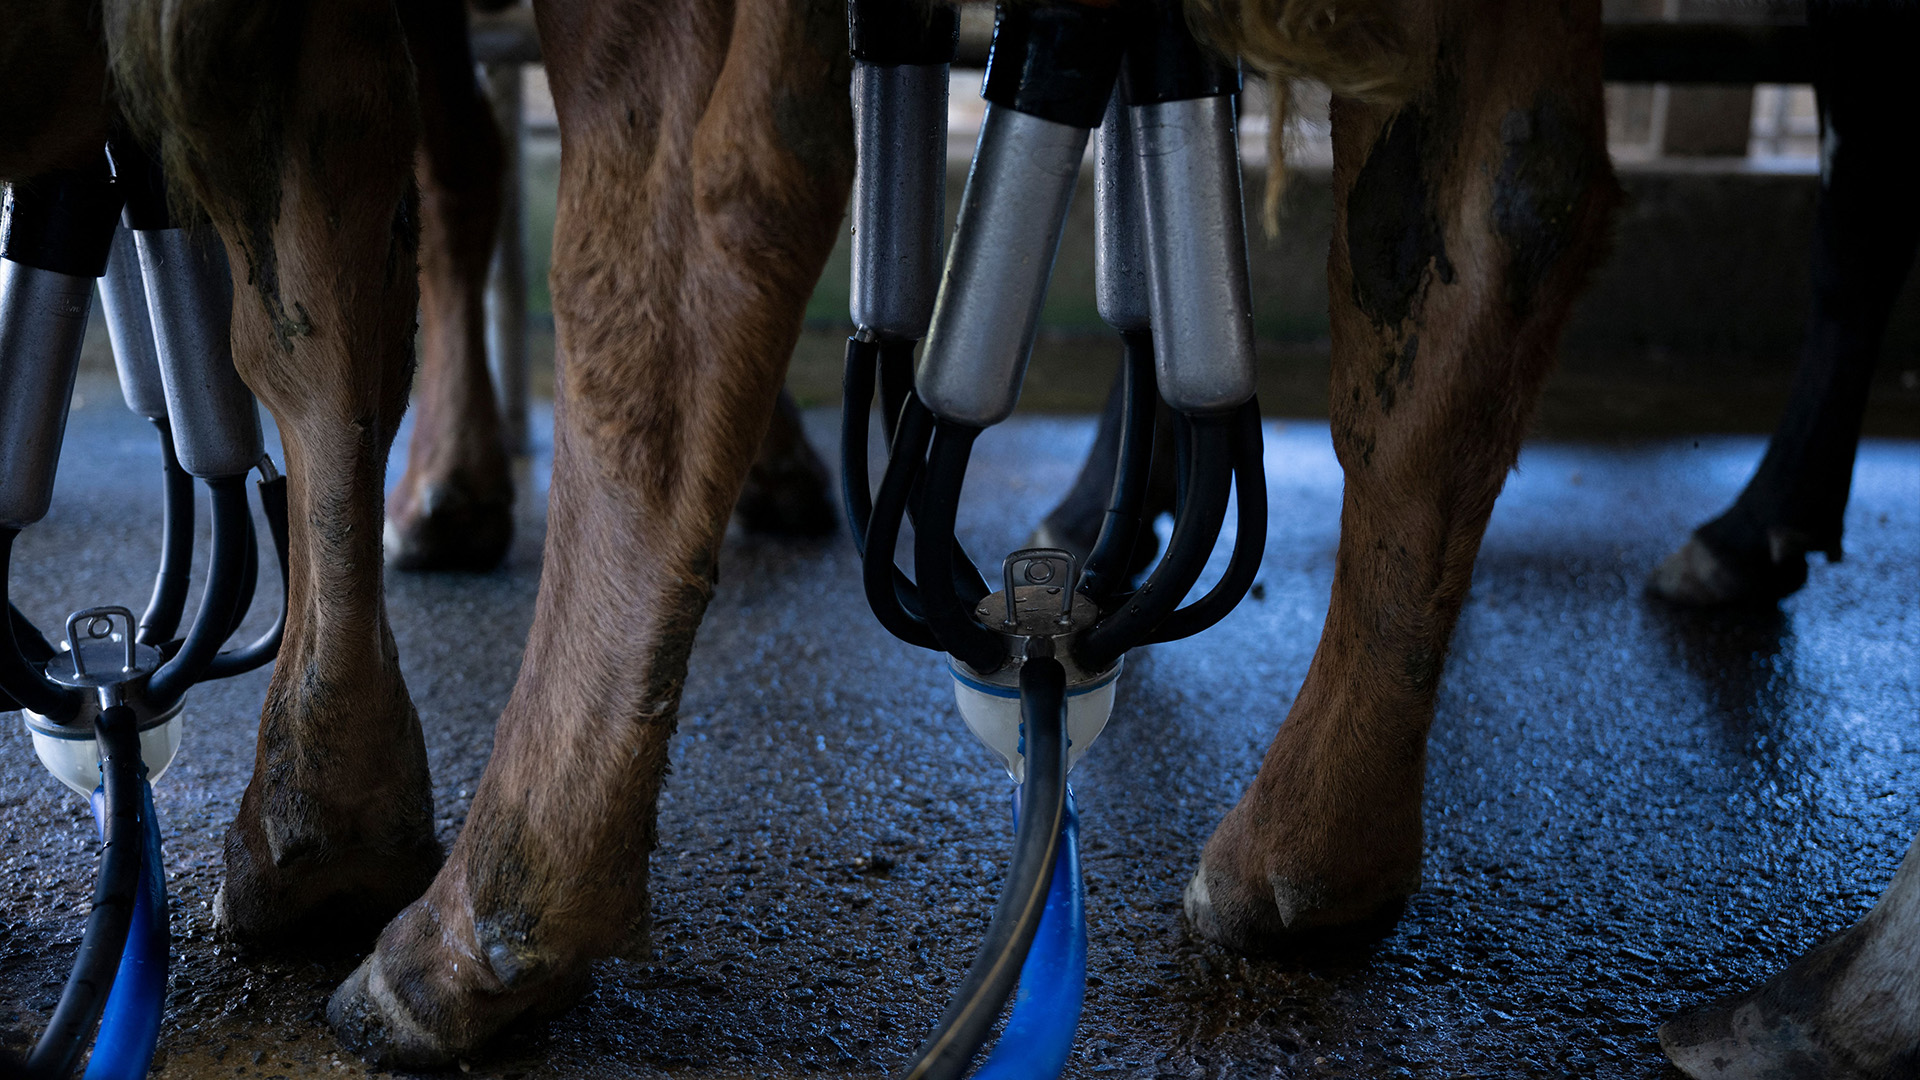 several dairy cows shown hooked up to milking machines